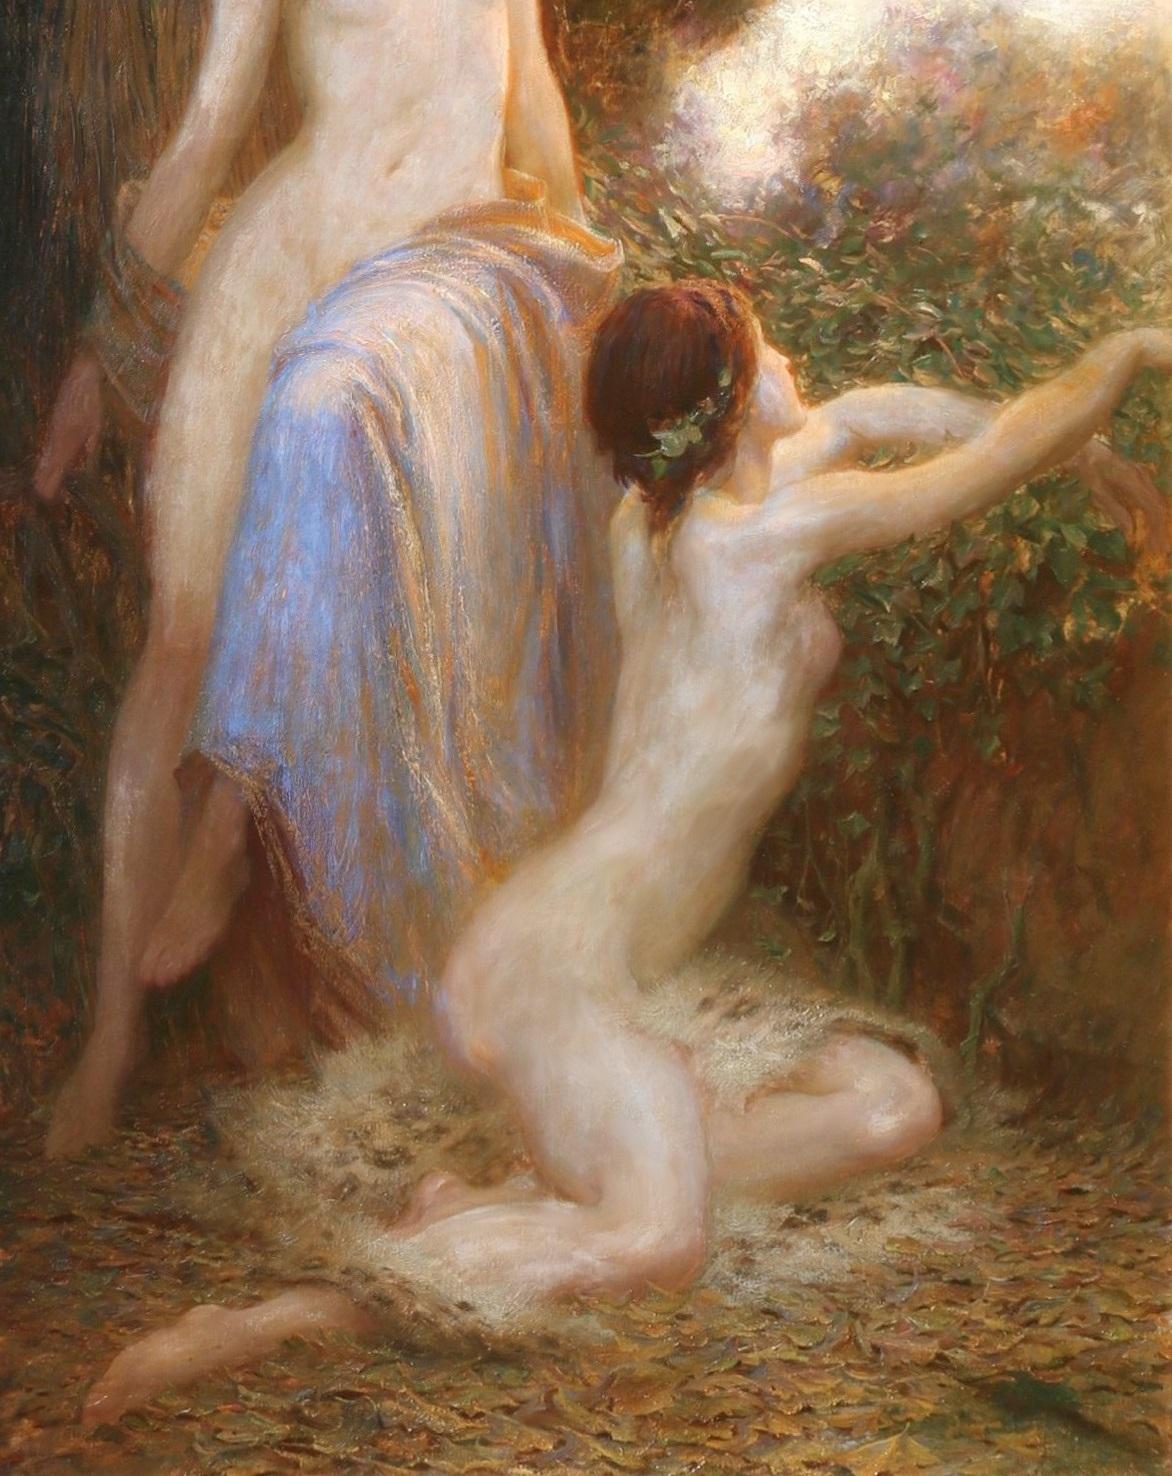 Awakening - Huge Royal Academy Oil Painting of Nymphs Neoclassical Nudes 3